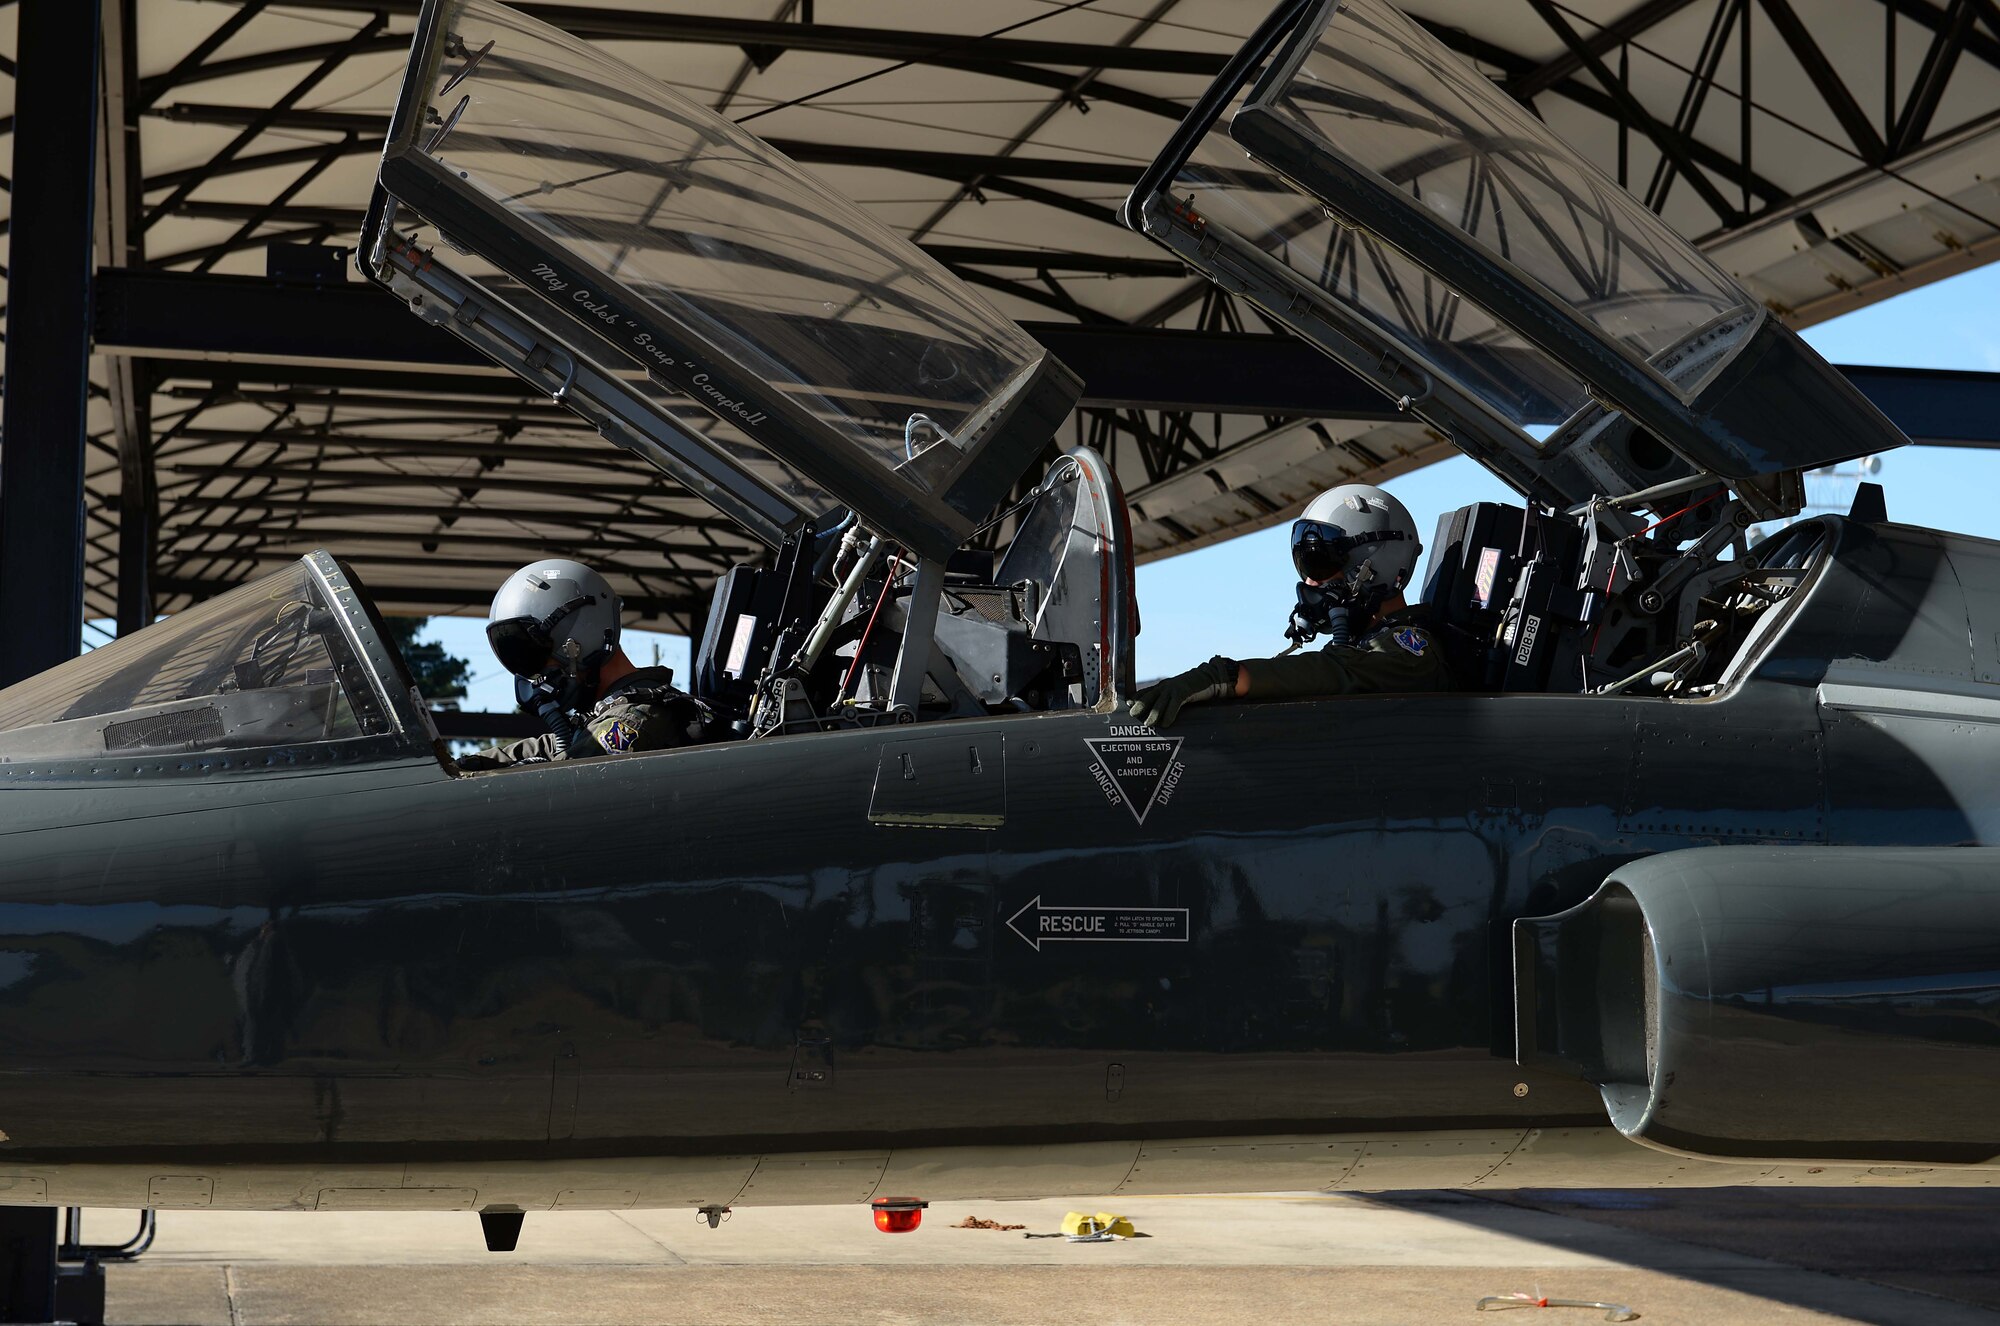 First Lt. Tyler Hansen, 49th Fighter Training Squadron student pilot, and Capt. Cole Stegeman, 49th FTS upgrading instructor pilot, check over a T-38C Talon in preparation for a training sortie Oct. 30, 2018, on Columbus Air Force Base, Mississippi. Pilots dedicate a great deal of time and effort ensuring their aircraft is fully prepared for flight. (U.S. Air Force photo by Airman Hannah Bean)